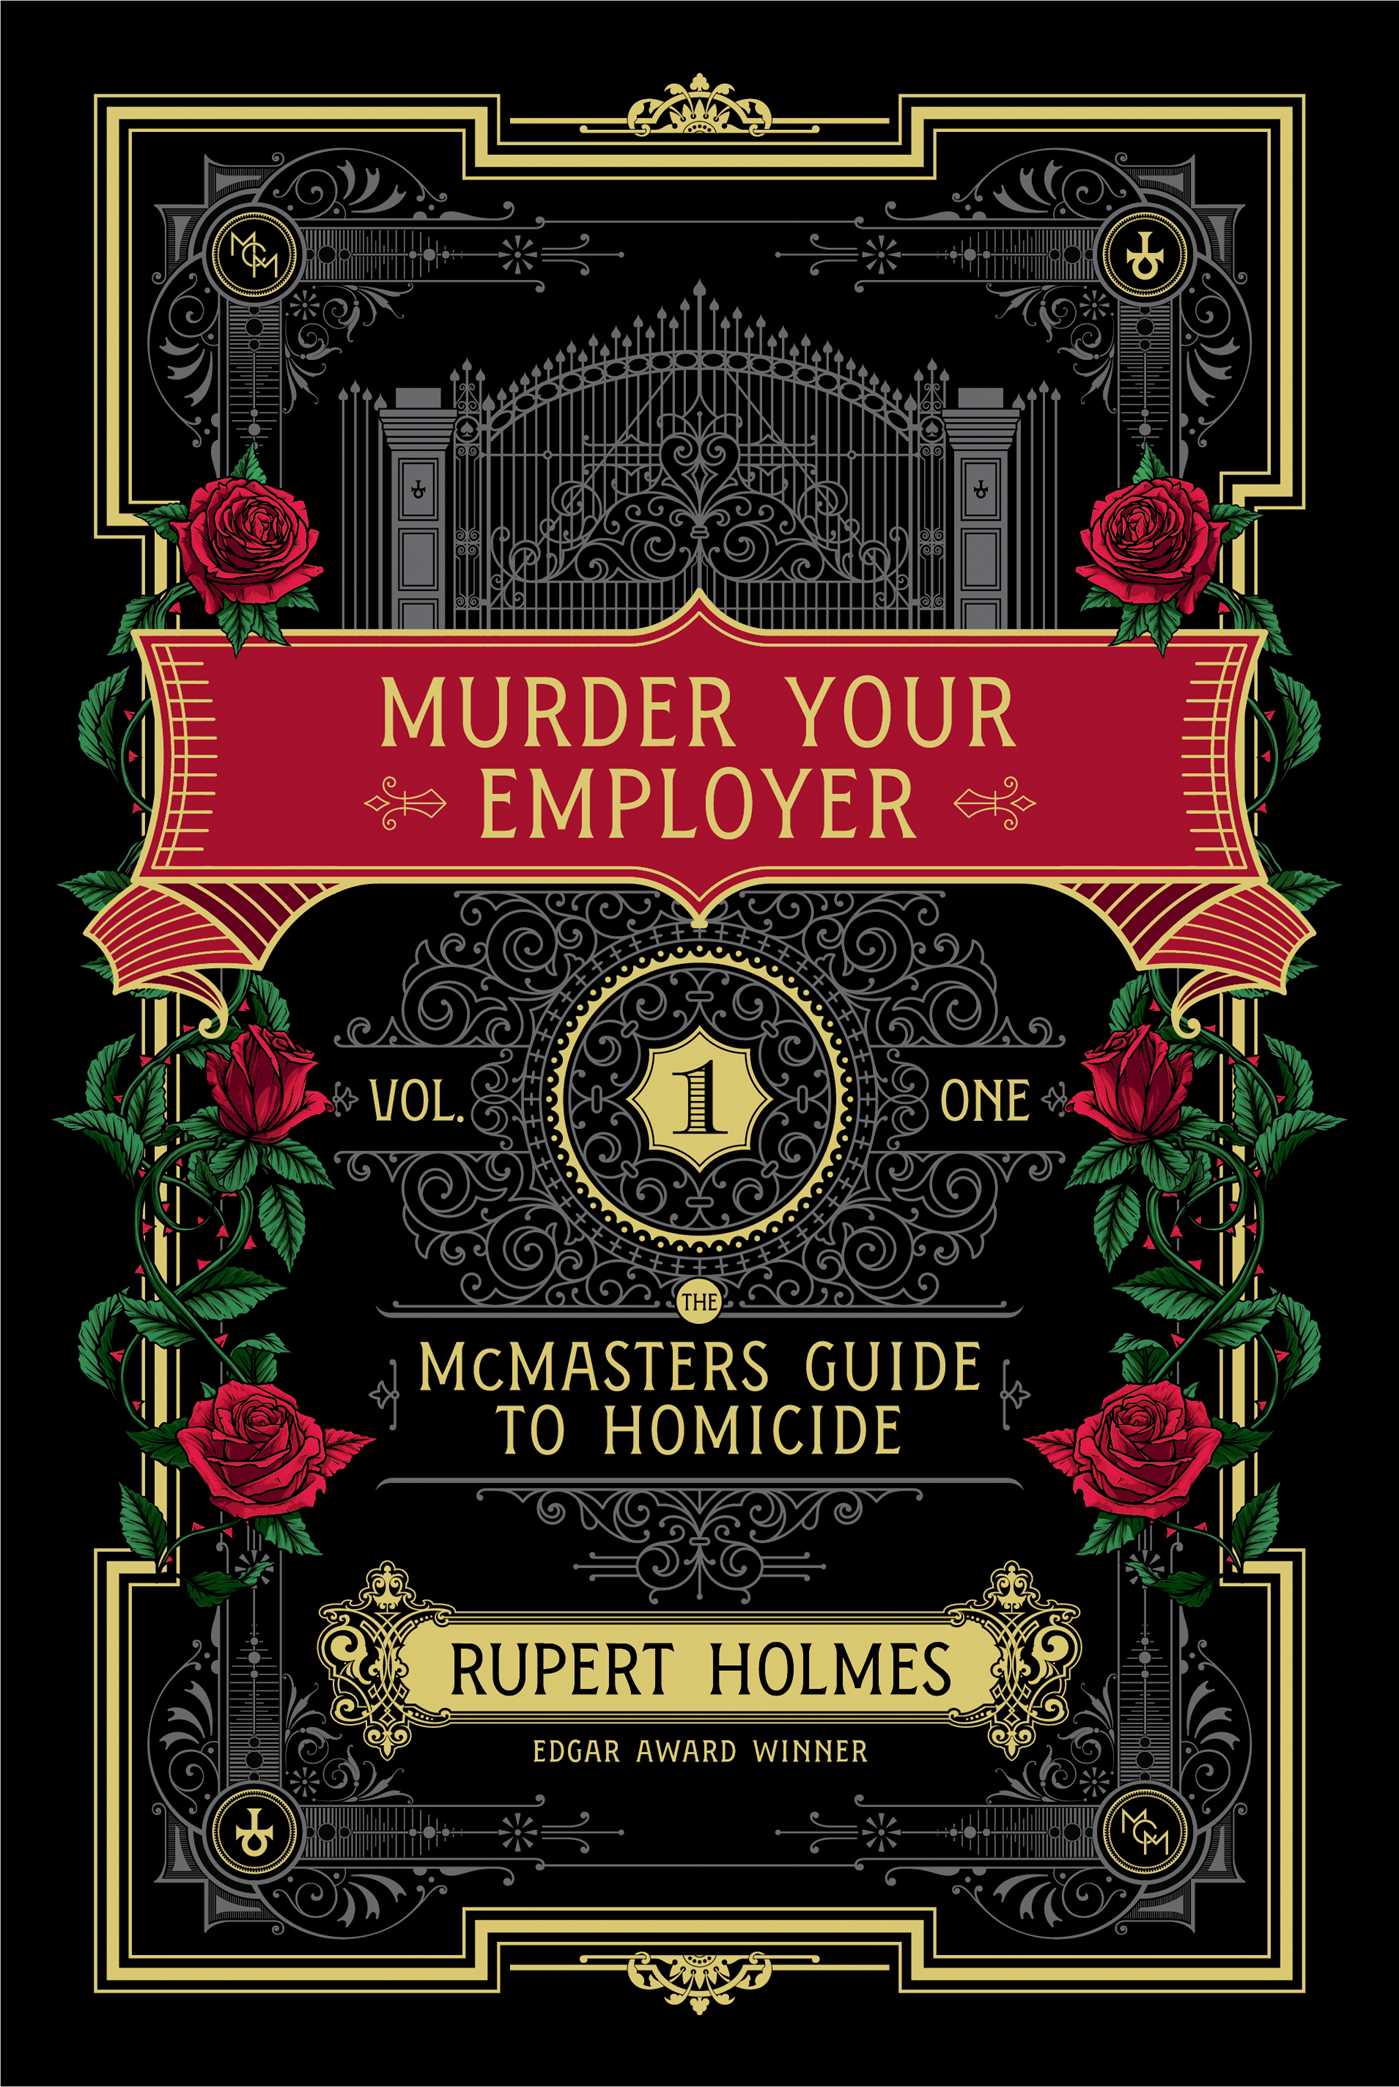 Murder Your Employer by Rupert Holmes PDF Download